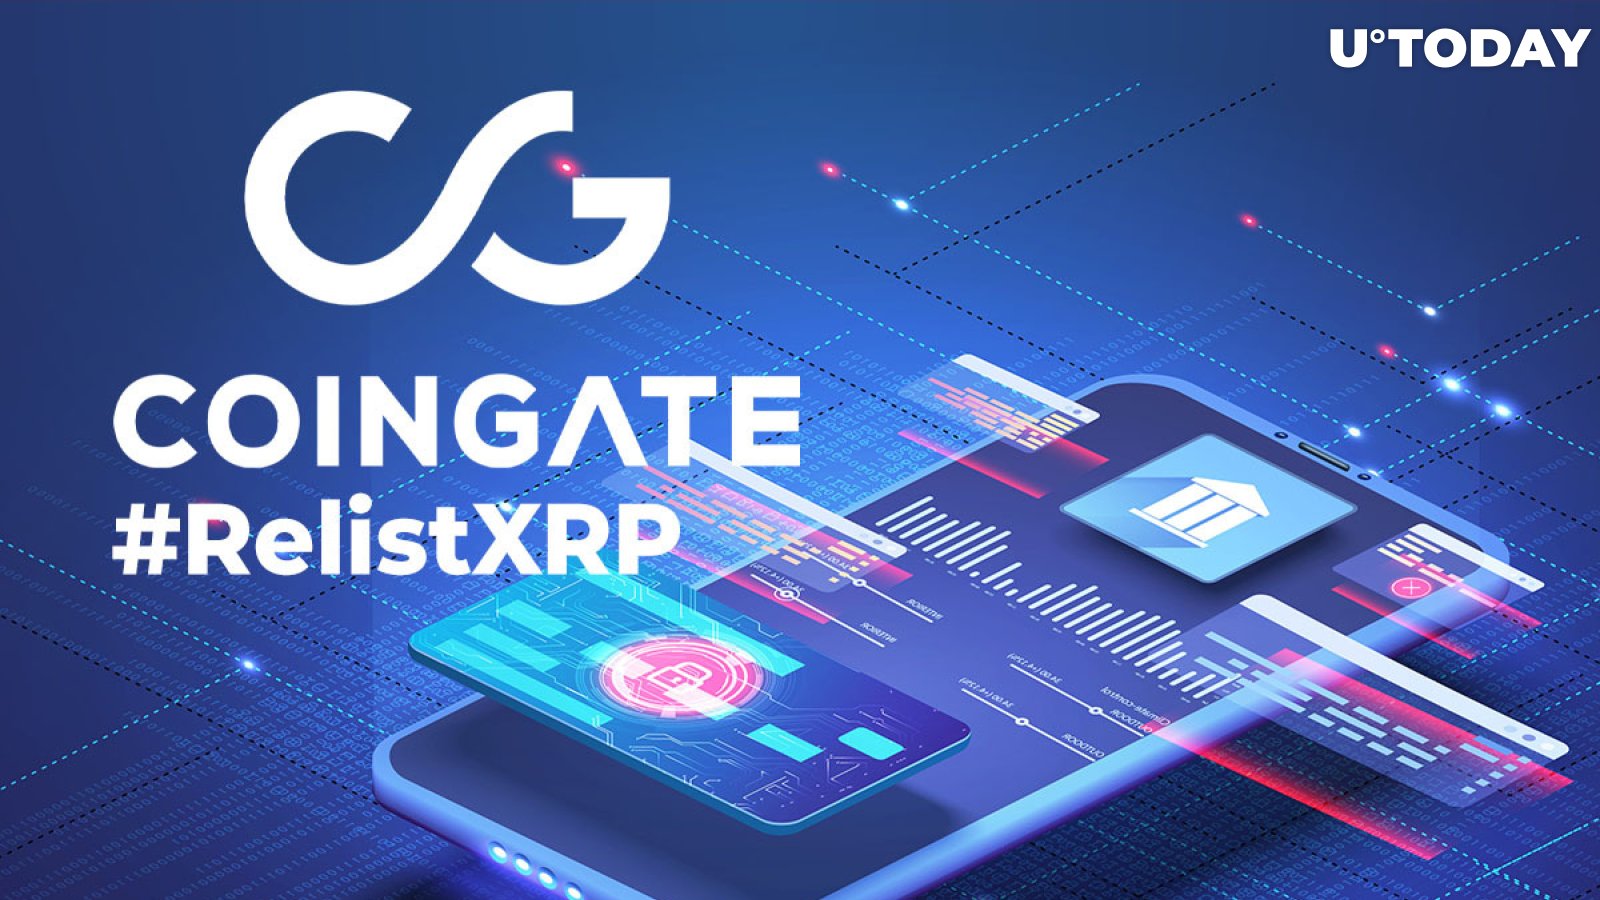 #RelistXRP Movement Gaining More Traction with Payment Company CoinGate